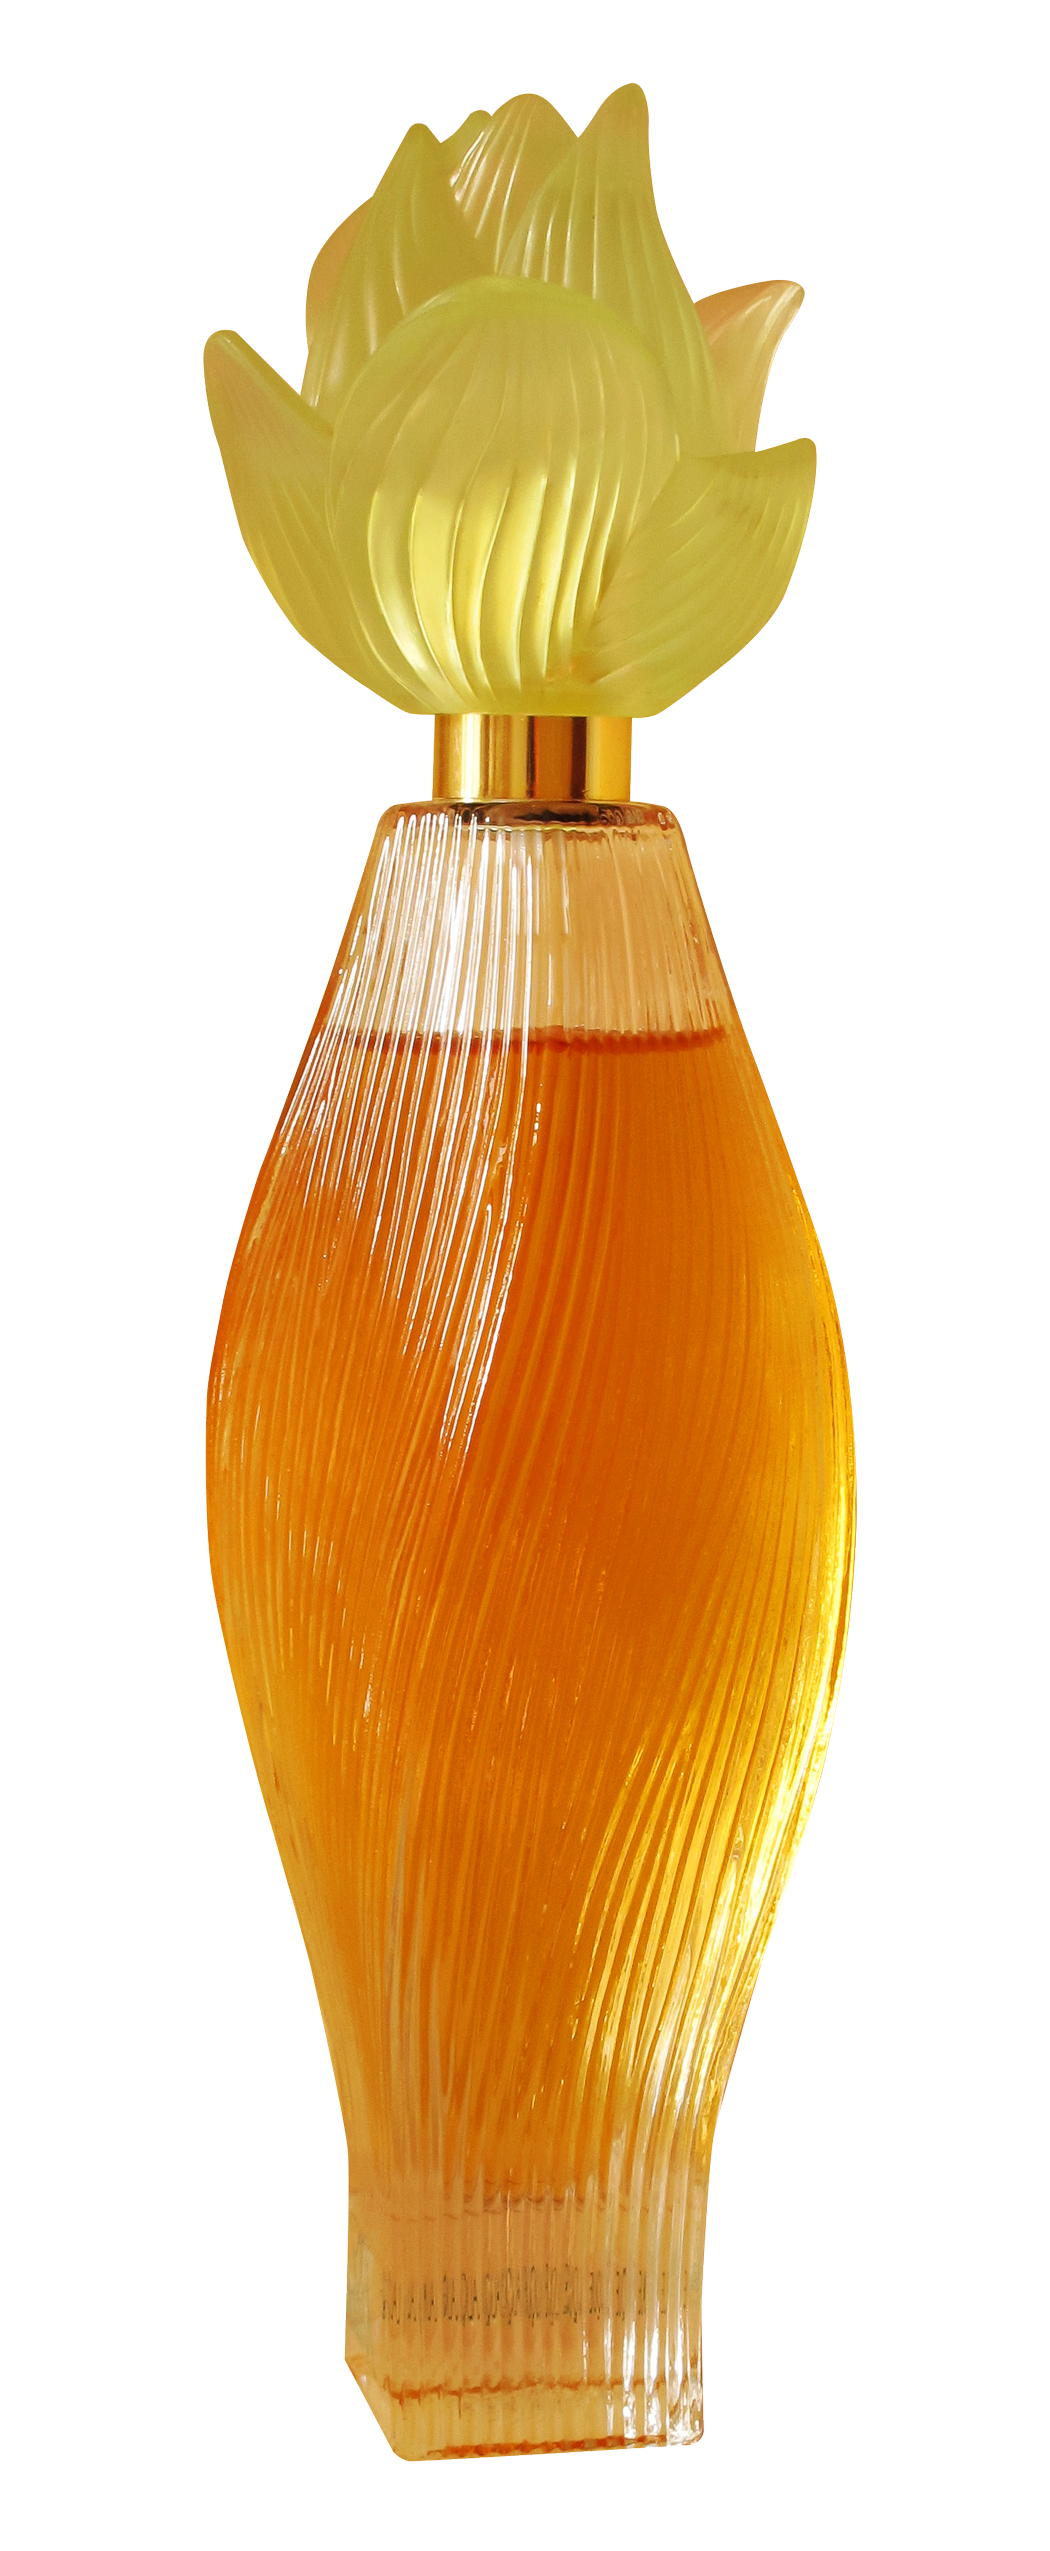 Perfume Bottle PNG Image - PurePNG | Free transparent CC0 PNG Image Library